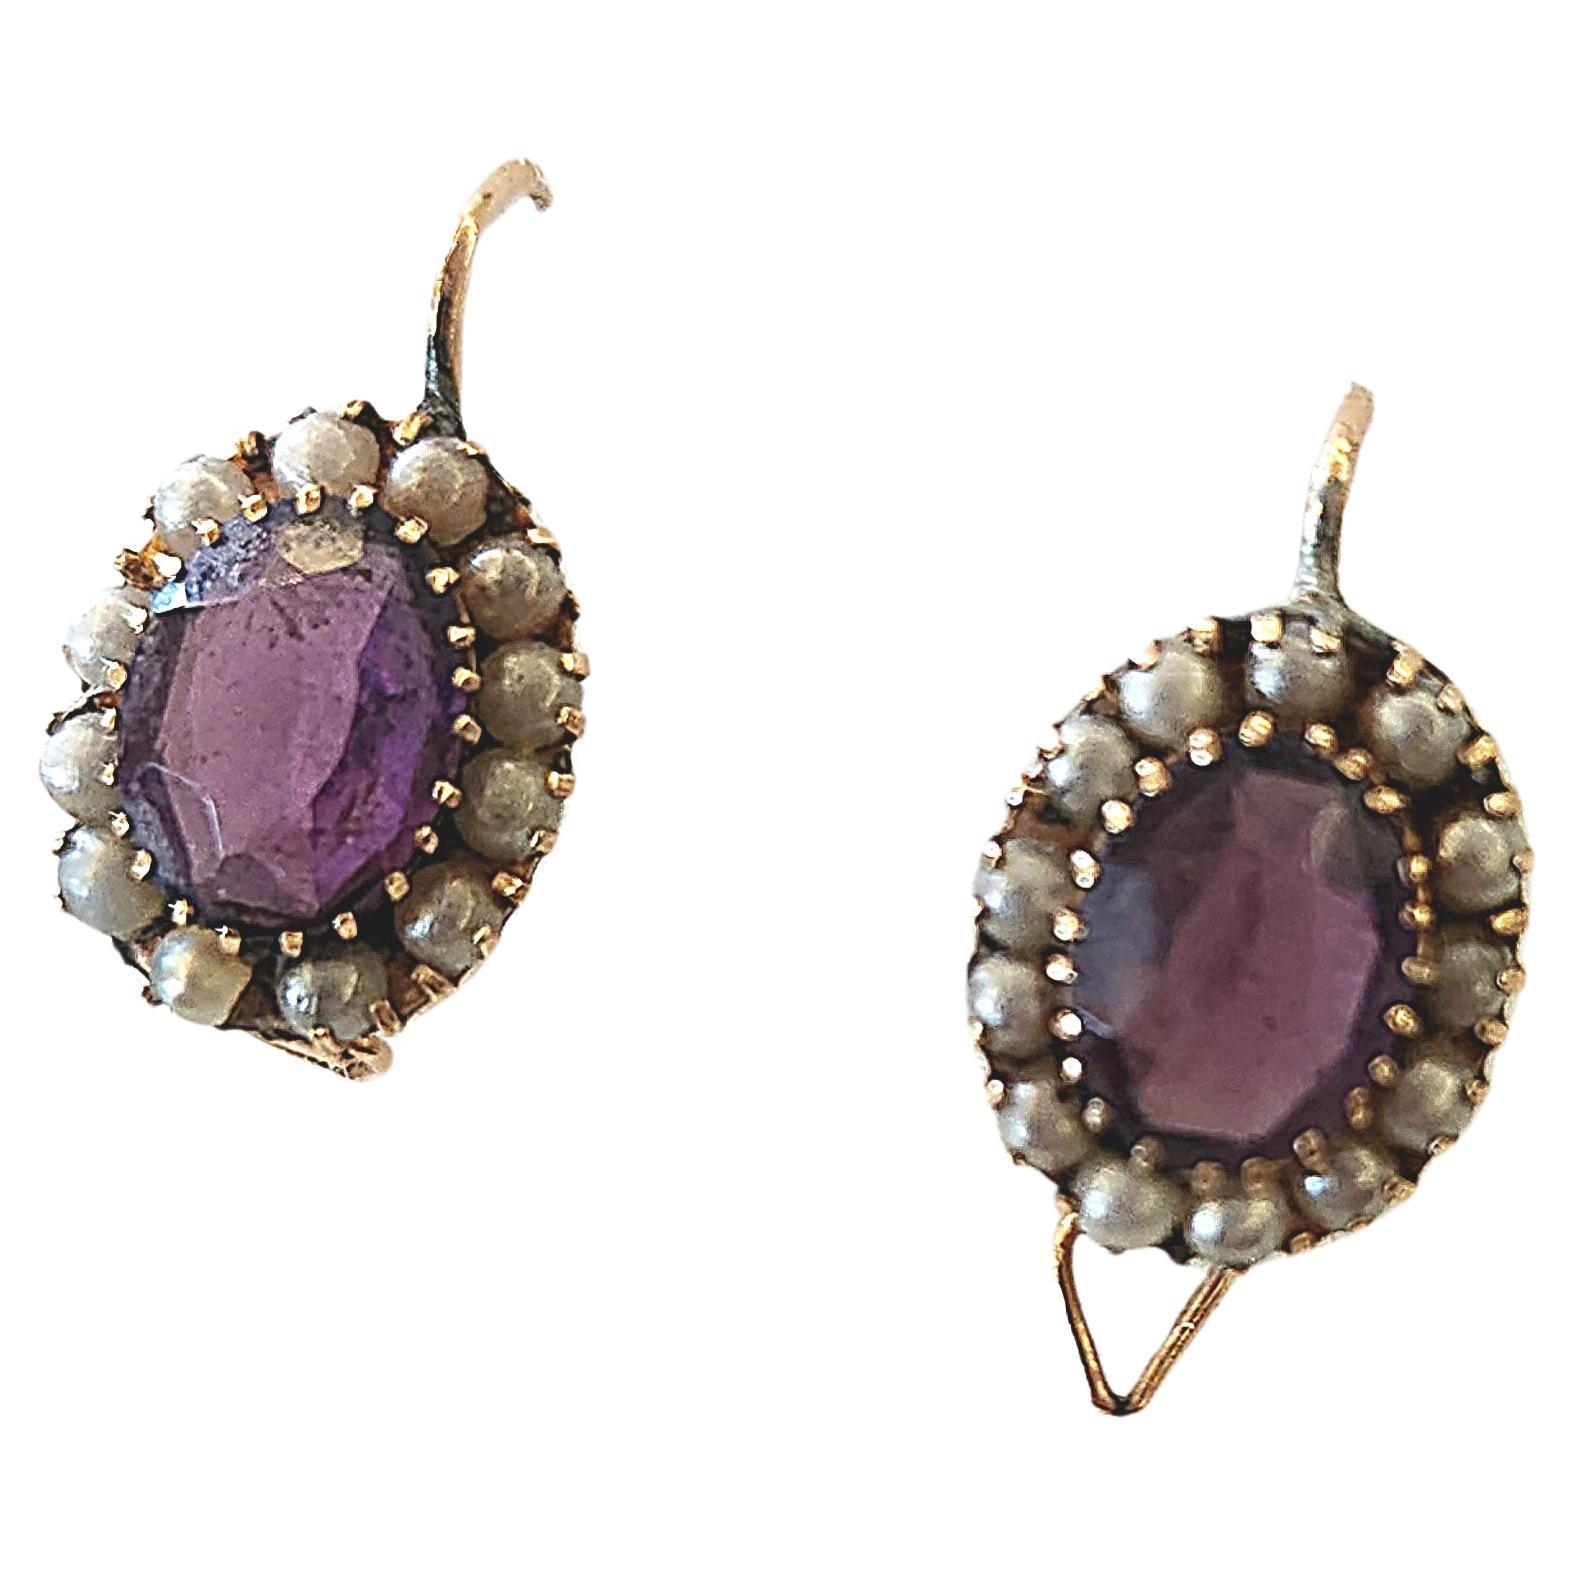 Antique imperial russian era 14k gold earrings centered with 2 oval cyberian amethyst stones flanked with natural white seed pearls earrings are hall marked with imperial russian gold standard and initial maker mark in cyrtlic alphabet